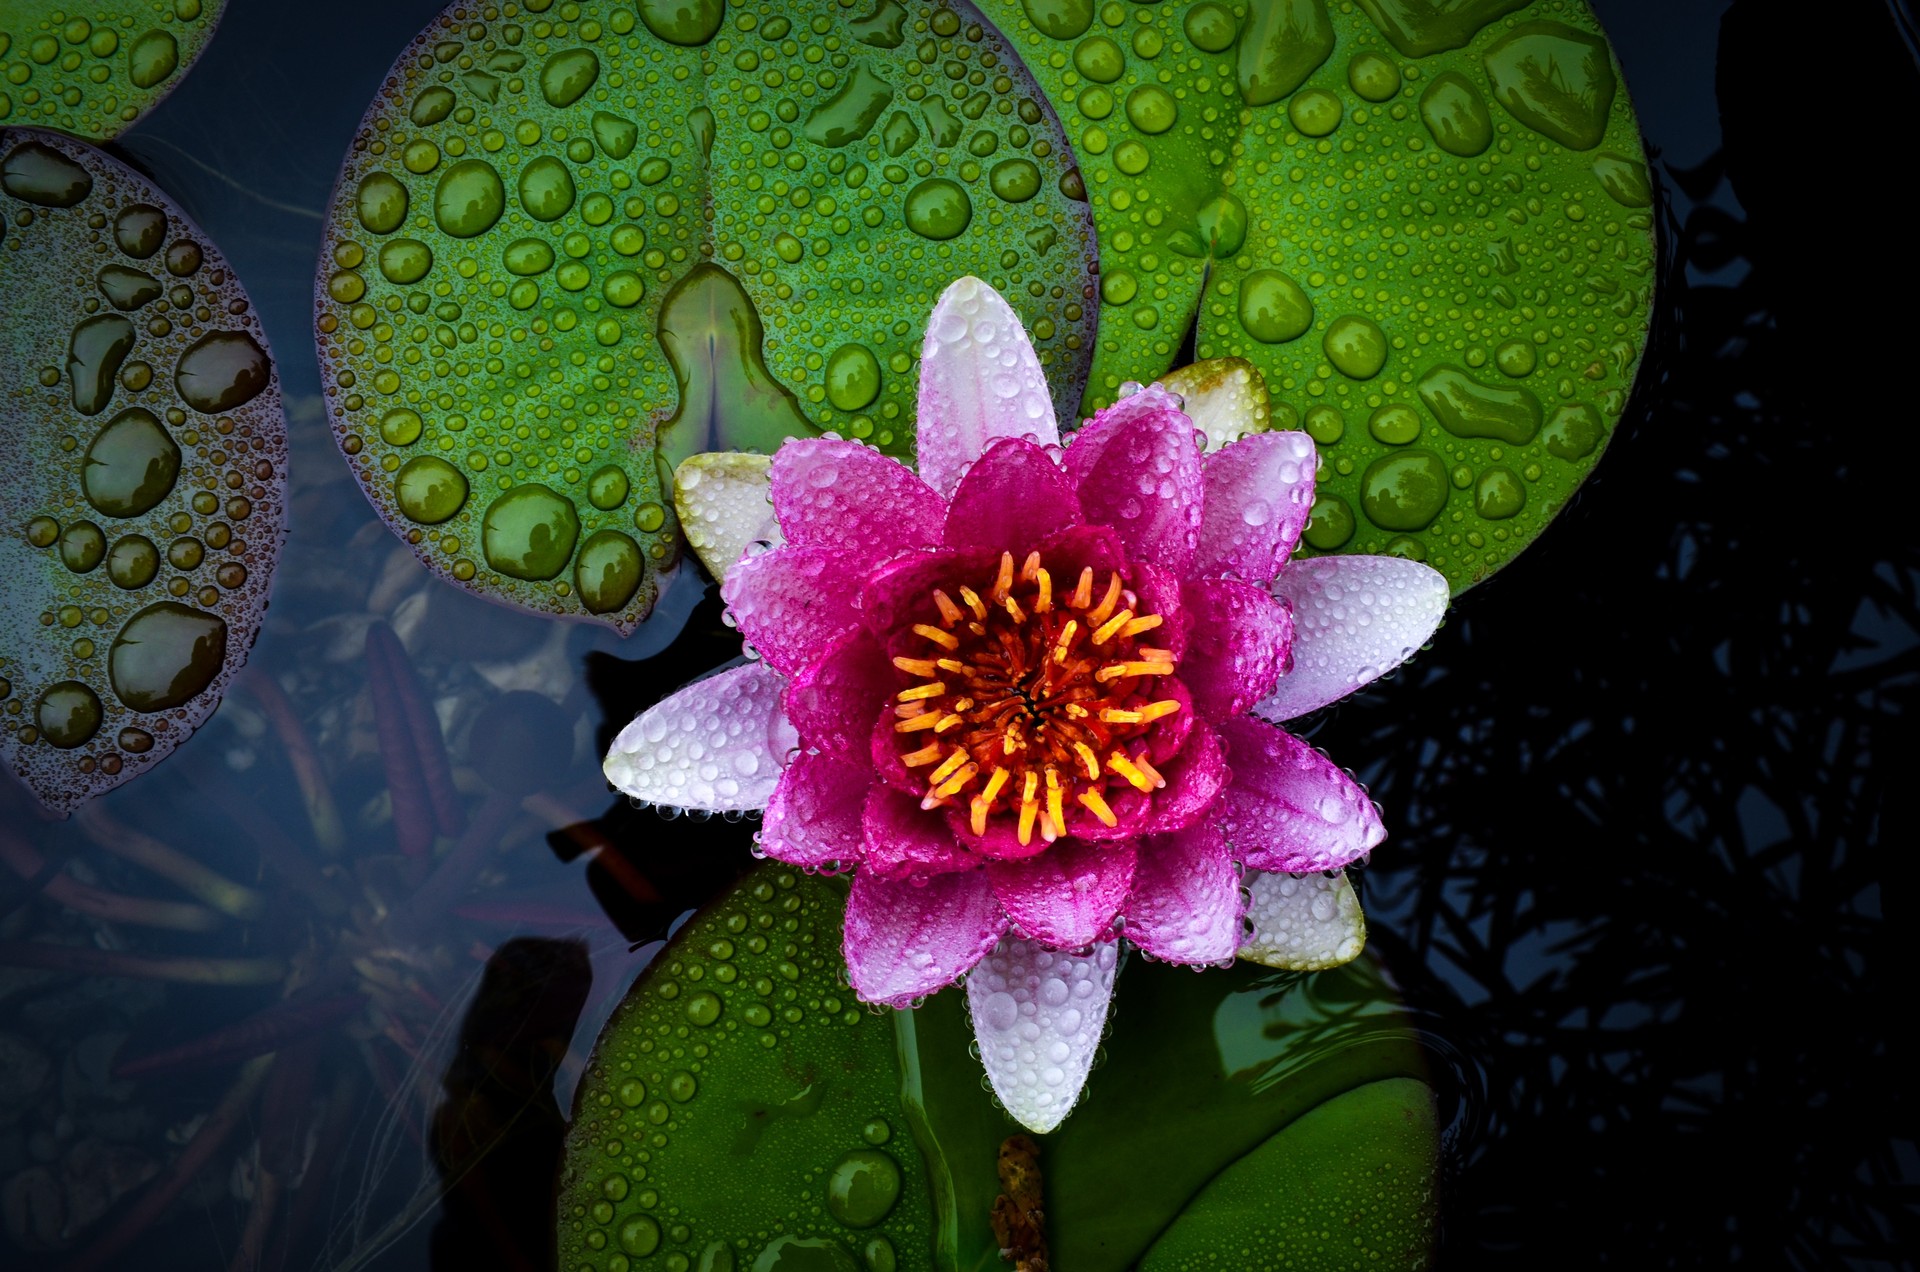 pink flower, lotus, water lily, earth, close up, leaf, lily pad, water drop, flowers